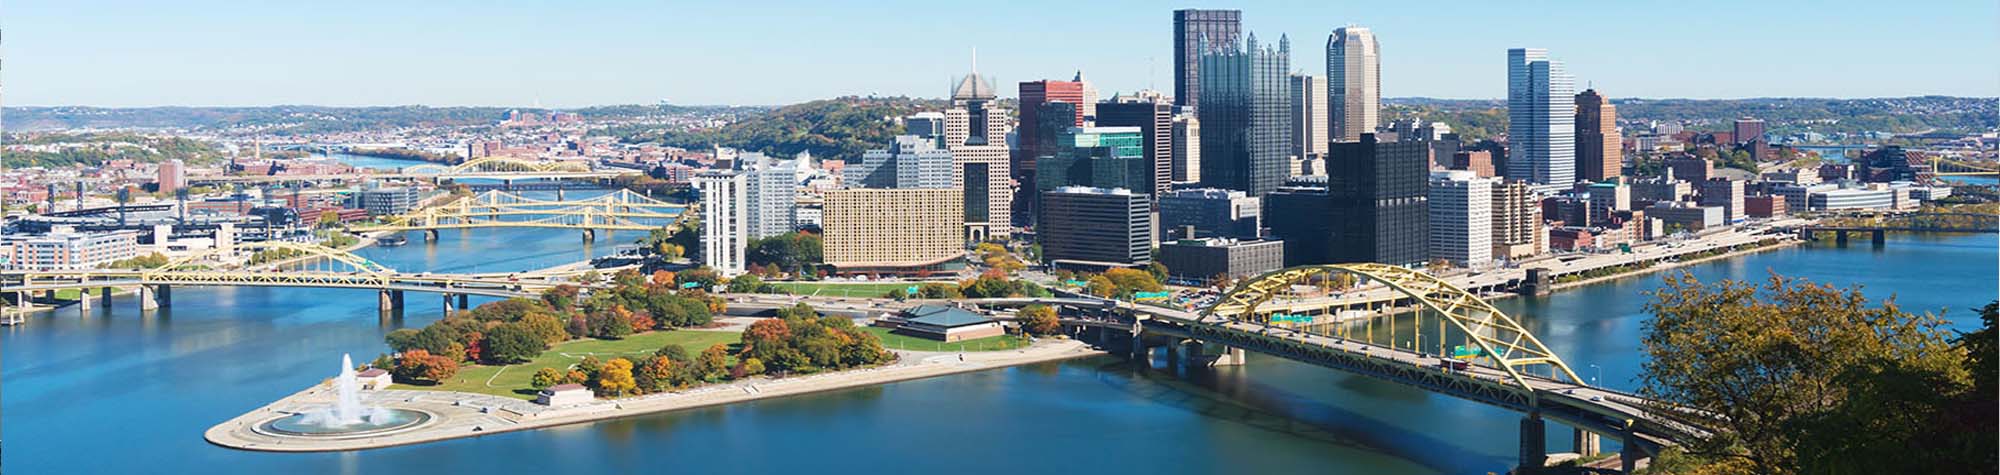 Why Leaf - City of Pittsburgh Header Image